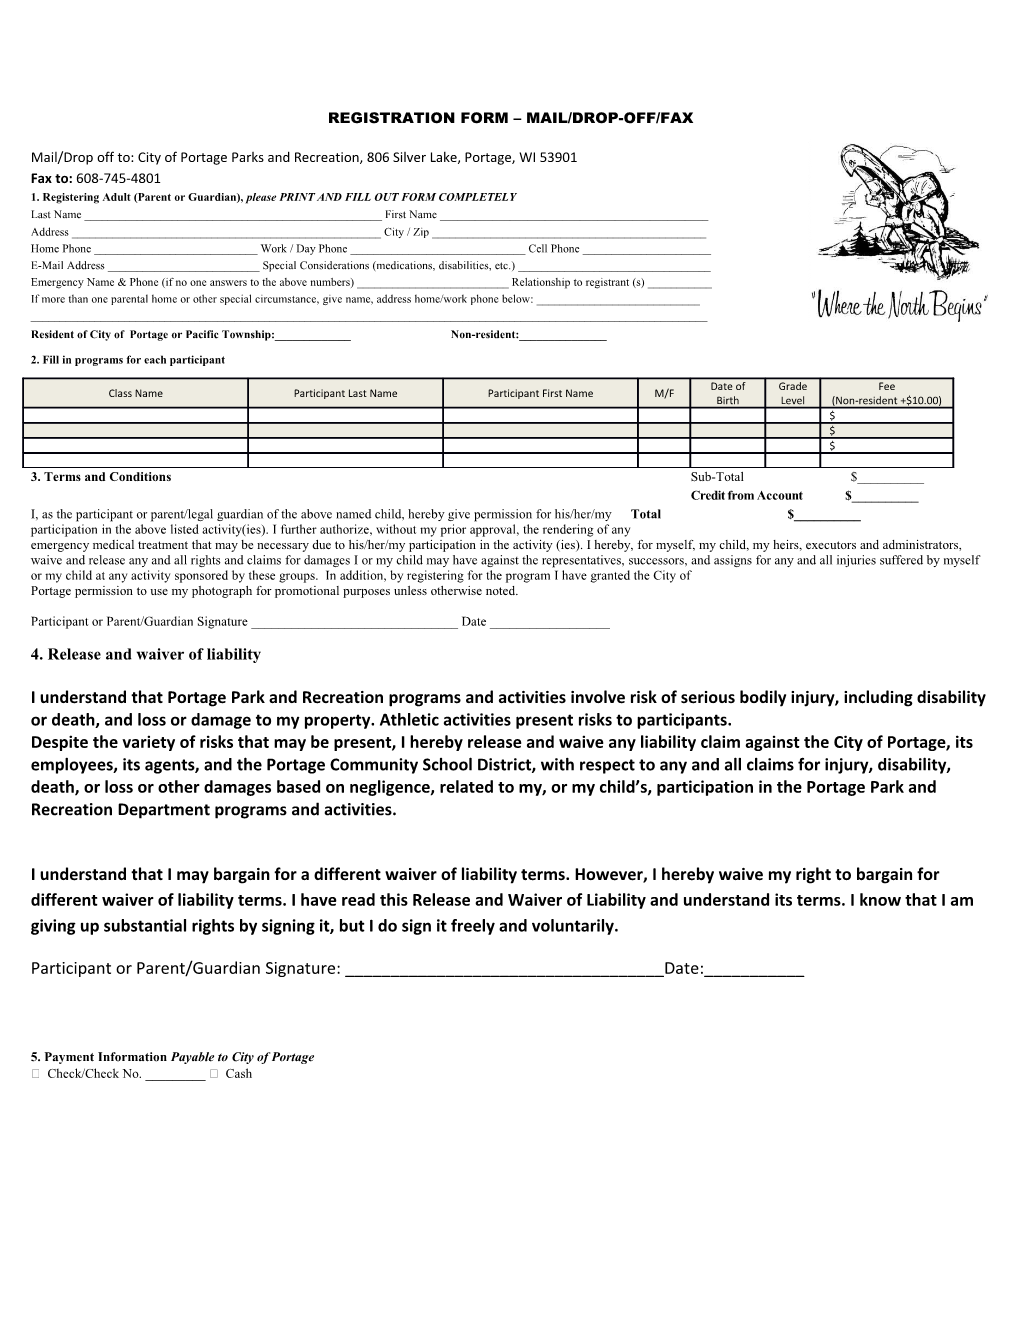 1. Registering Adult (Parent Or Guardian), Please PRINT and FILL out FORM COMPLETELY